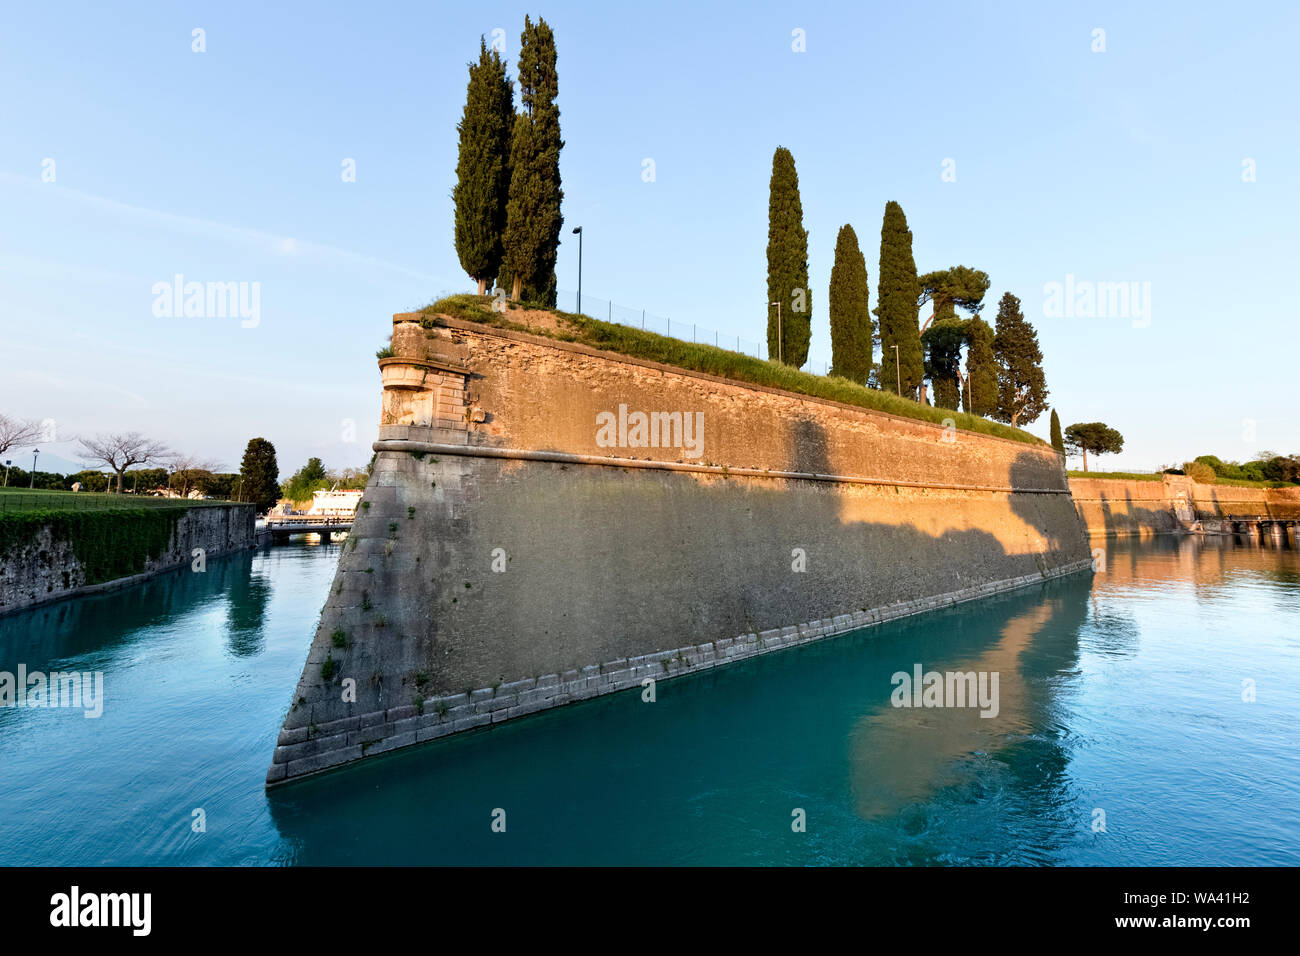 The fortress of Peschiera del Garda was built by the Republic of Venice: today it is a UNESCO World Heritage Site. Verona province, Veneto, Italy. Stock Photo